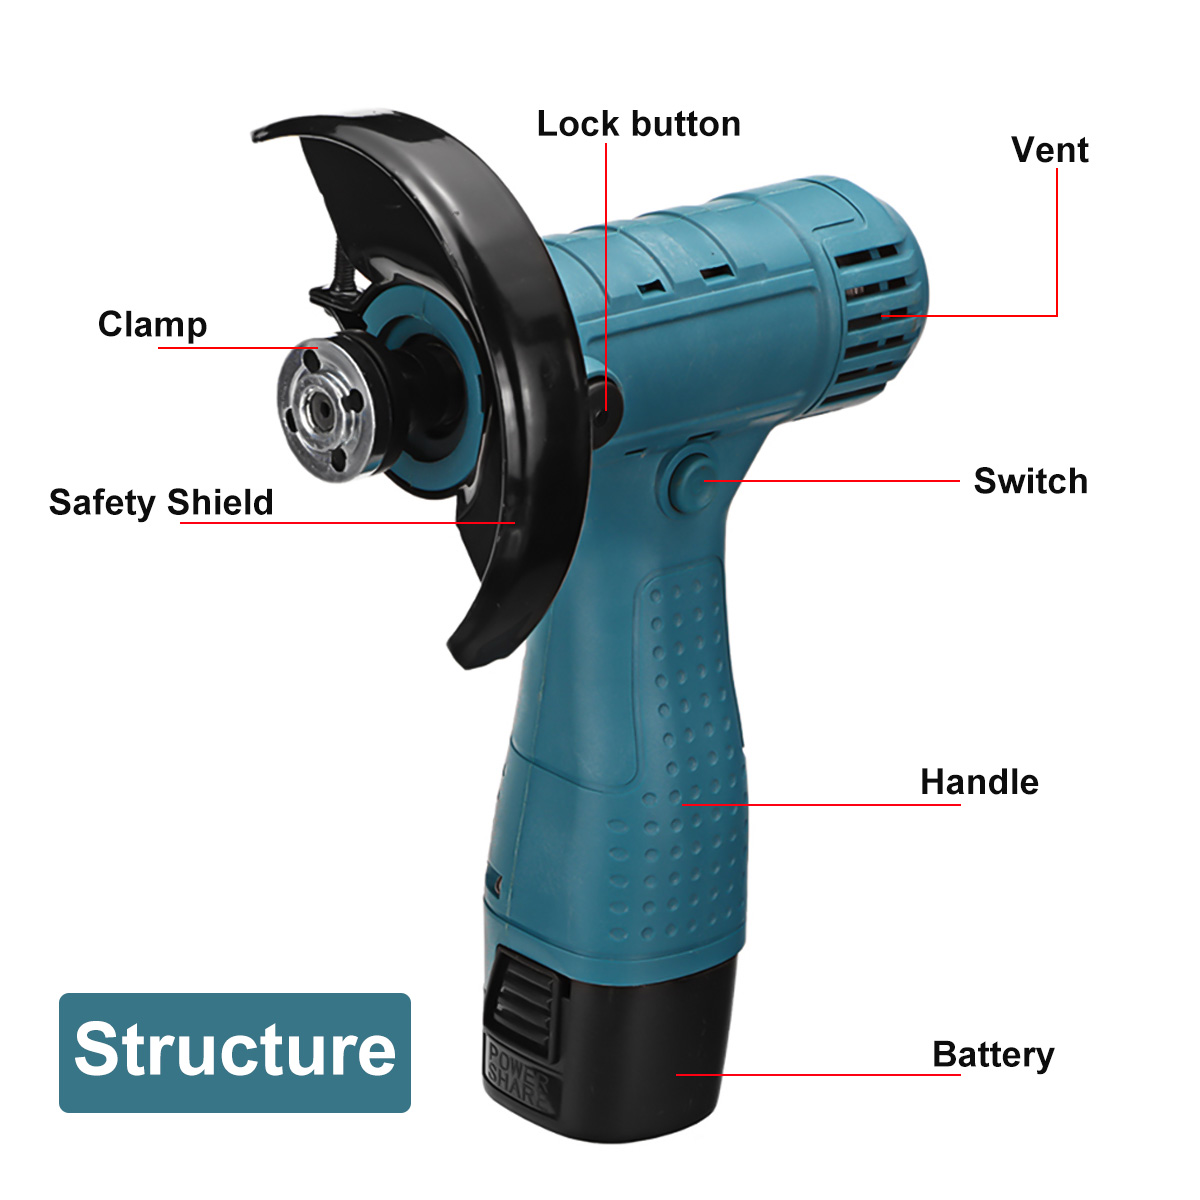 100mm-18V-800W-Electric-Angle-Grinder-Portable-Handheld-Cutting-Polishing-Tool-W-12-Battery-1871661-6